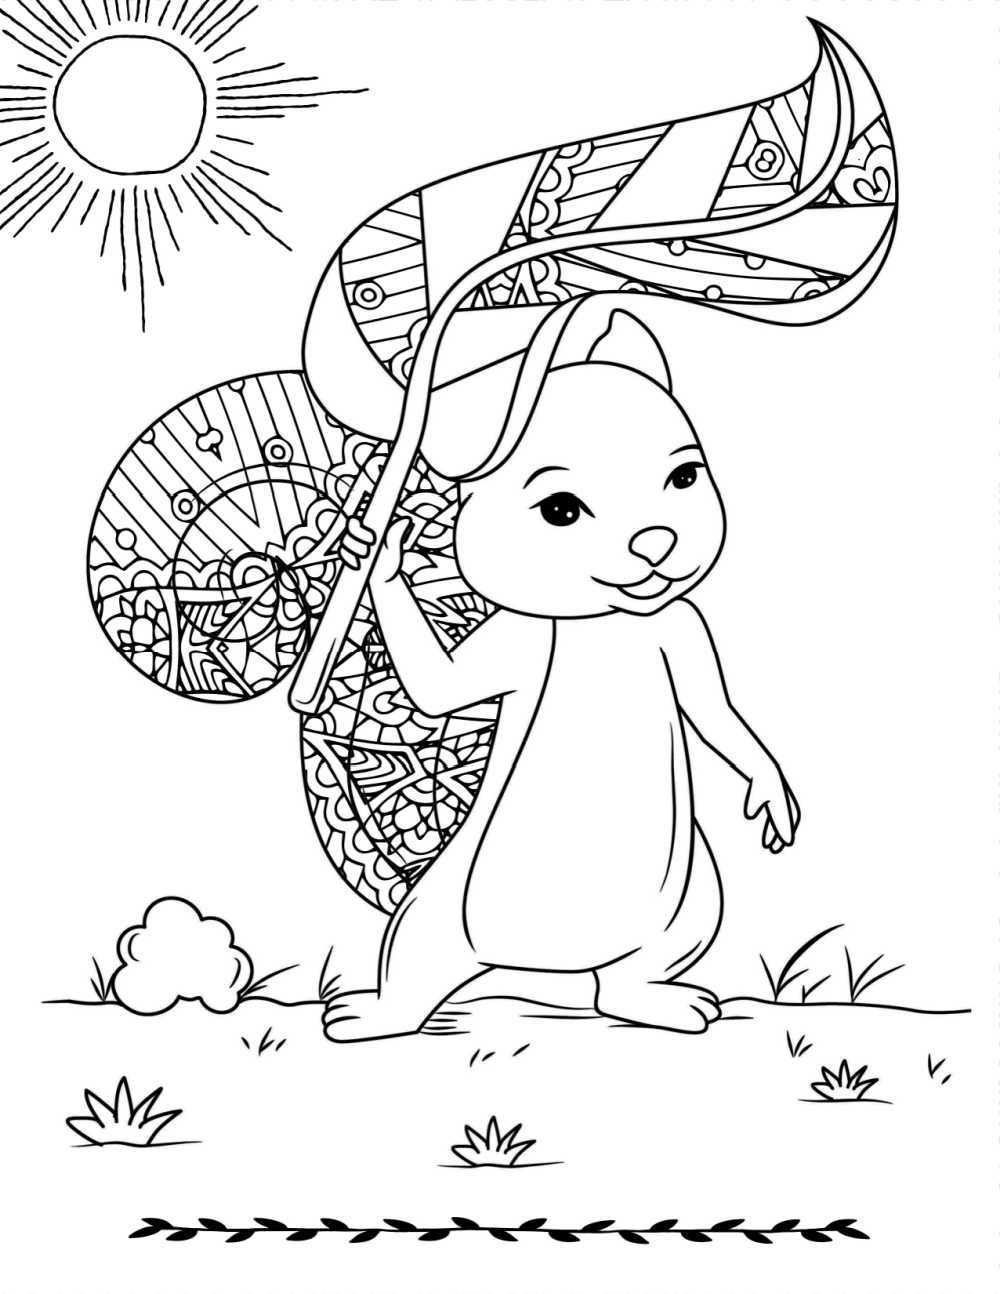 Free Printable Squirrel In The Sunshine Coloring Page   Mama Likes ...